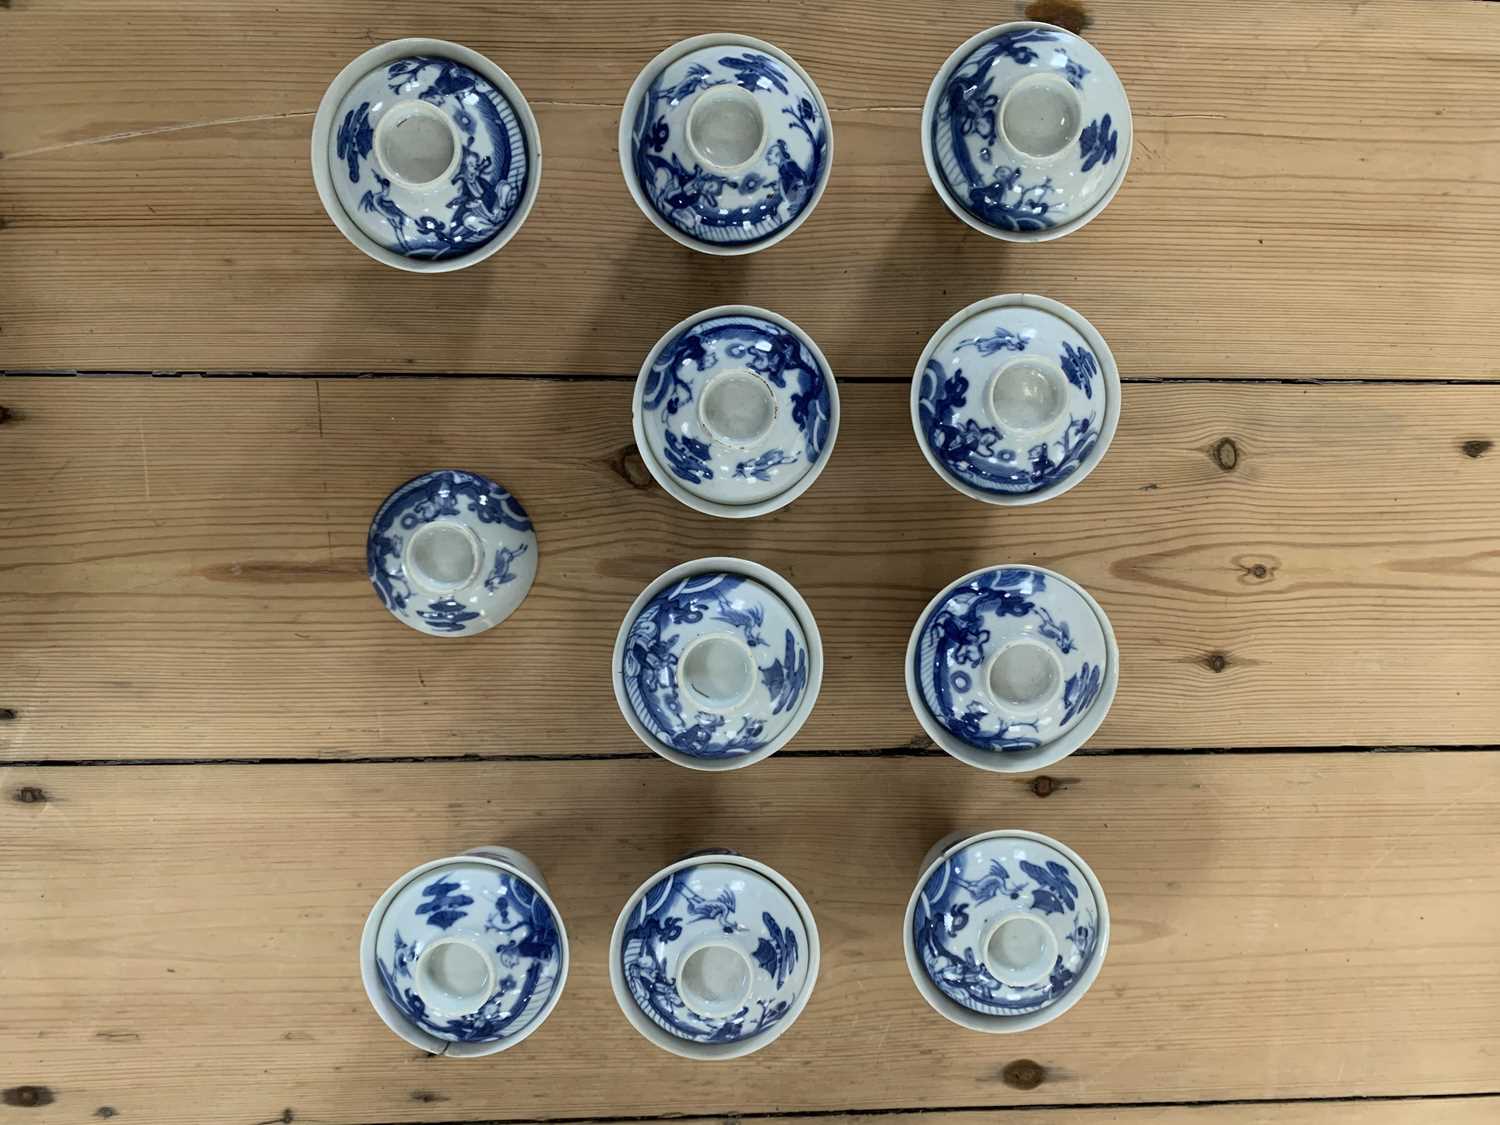 A set of Chinese blue and white porcelain cups, covers and stands, 18th century. - Image 17 of 41